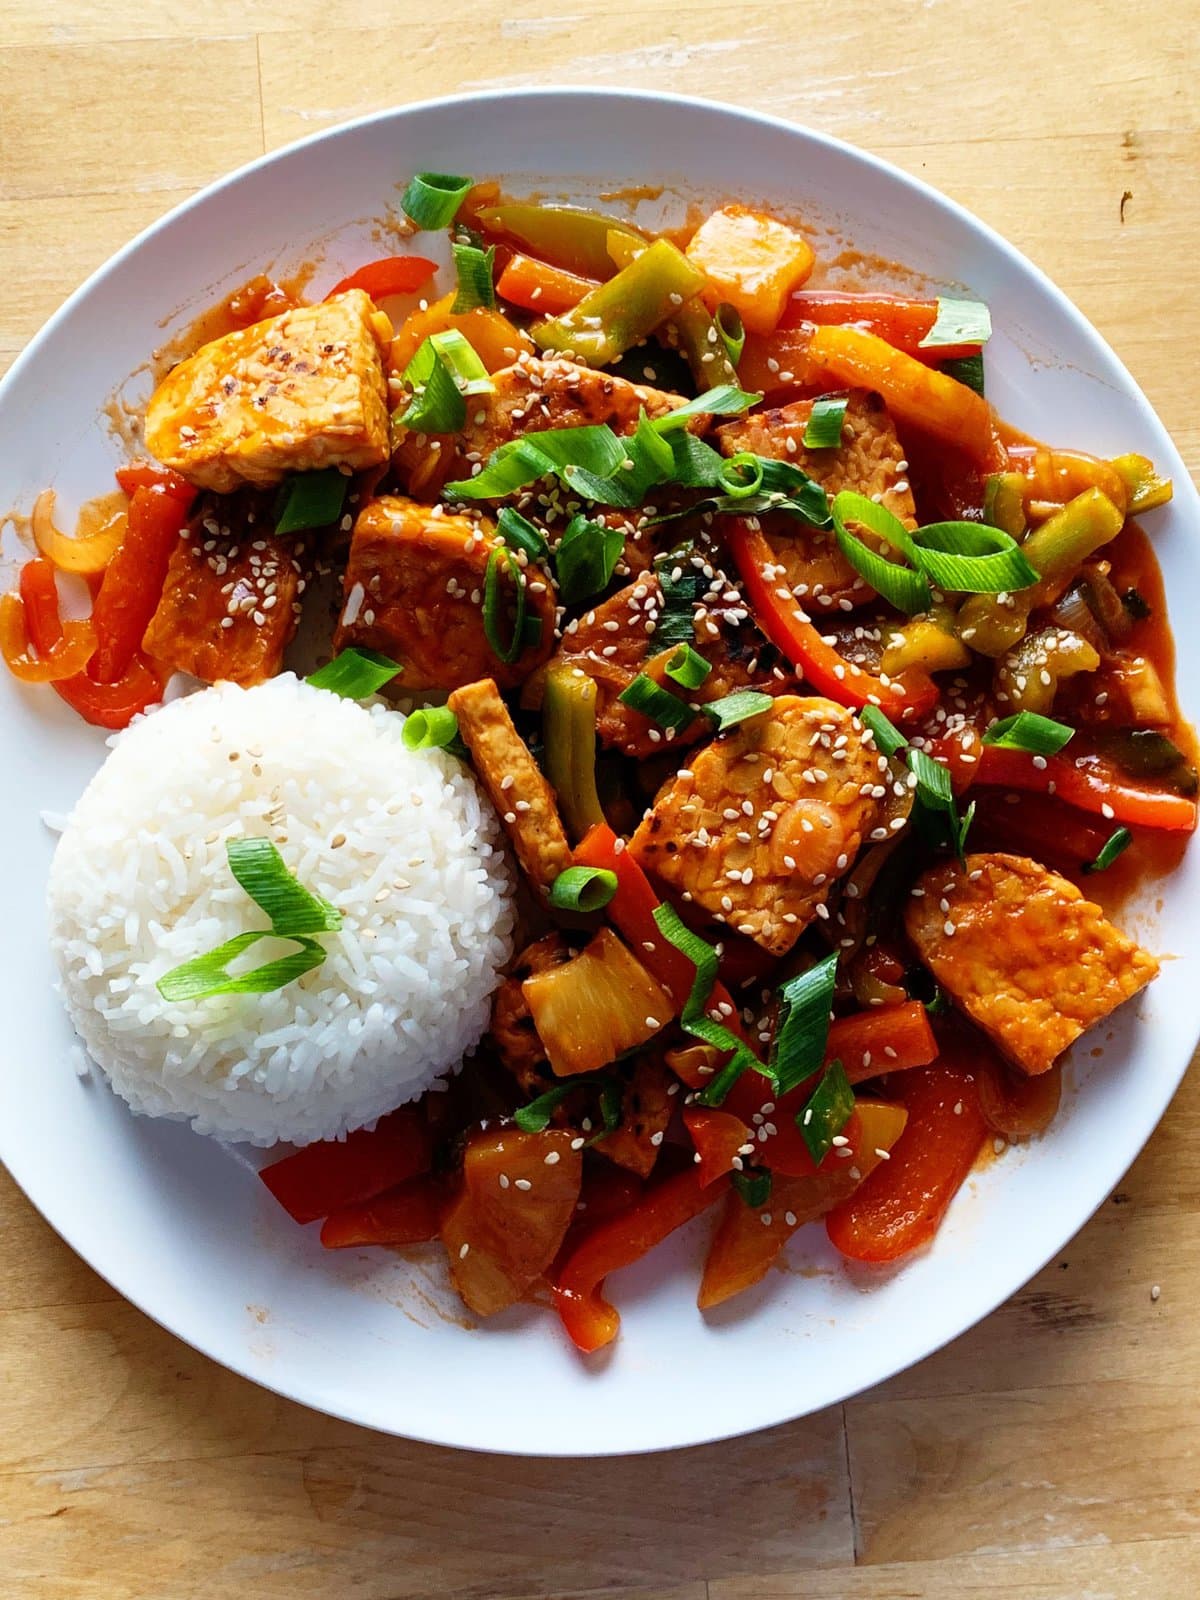 Sweet and sour tempeh - cover pic